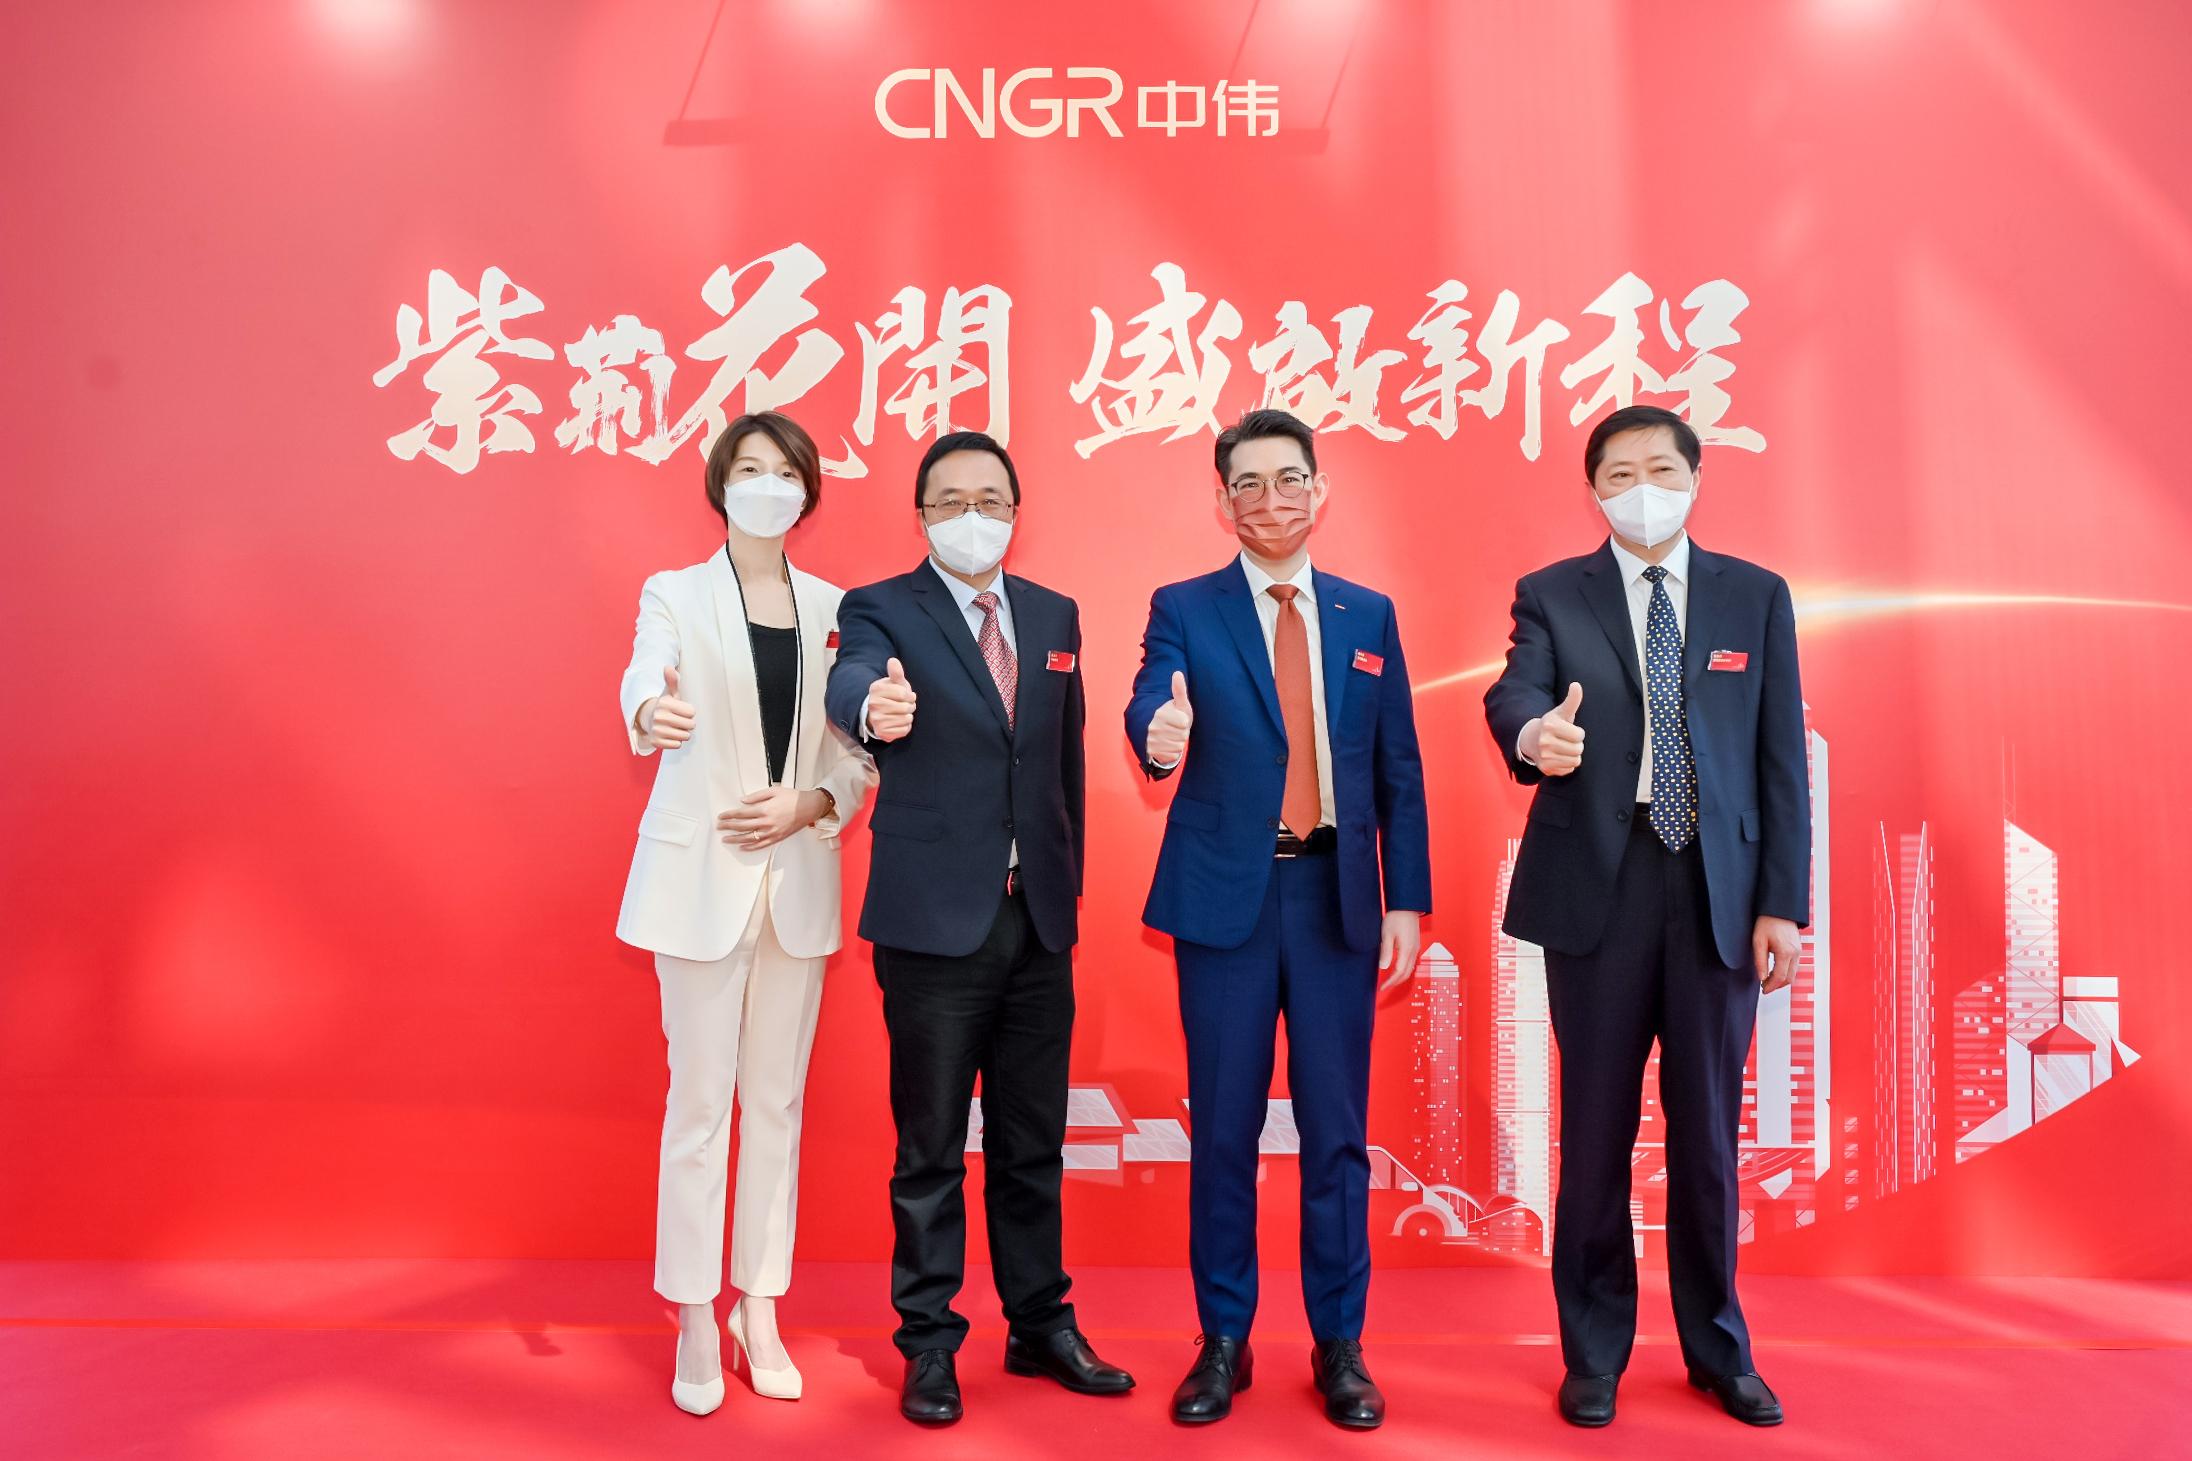 Mainland comprehensive services provider of new energy materials, CNGR Advanced Material Co Ltd (CNGR), officially opened its regional headquarters in Hong Kong today (February 23), leveraging the city's unique advantages in the region to spearhead the company's global expansion plan. Photo shows (from left) Vice President of CNGR International Headquarters Mrs Yan Xin, Vice President of CNGR Mr Zhu Zongyuan, Invest Hong Kong Associate Director-General of Investment Promotion Dr Jimmy Chiang, and Deputy Director of the Hong Kong and Macao Affairs Office in Hunan Mr Wu Yibiao at the opening ceremony. 



